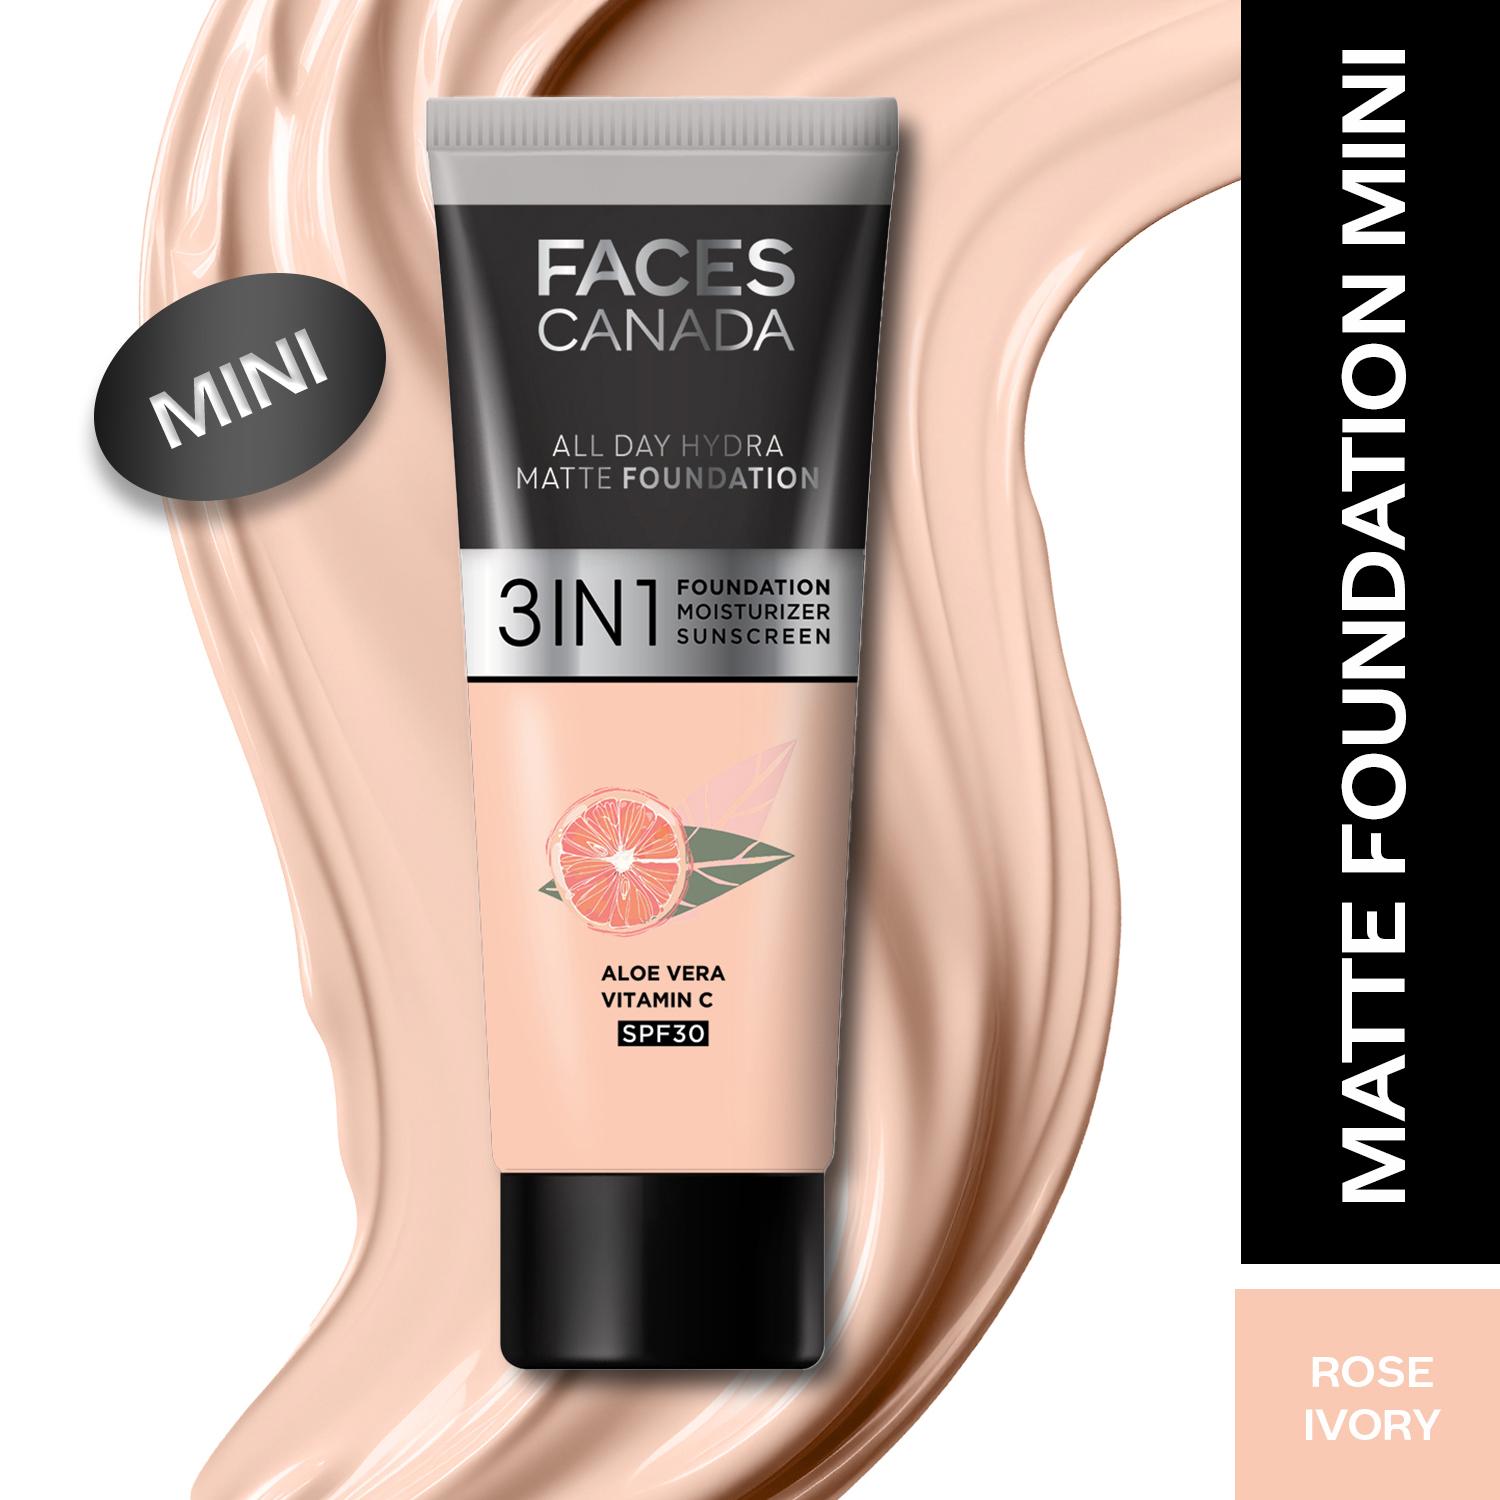 Faces Canada | Faces Canada 3In1 All Day Hydra Matte Foundation + Moisturizer + SPF 30 - Rose Ivory 011 (15 ml)